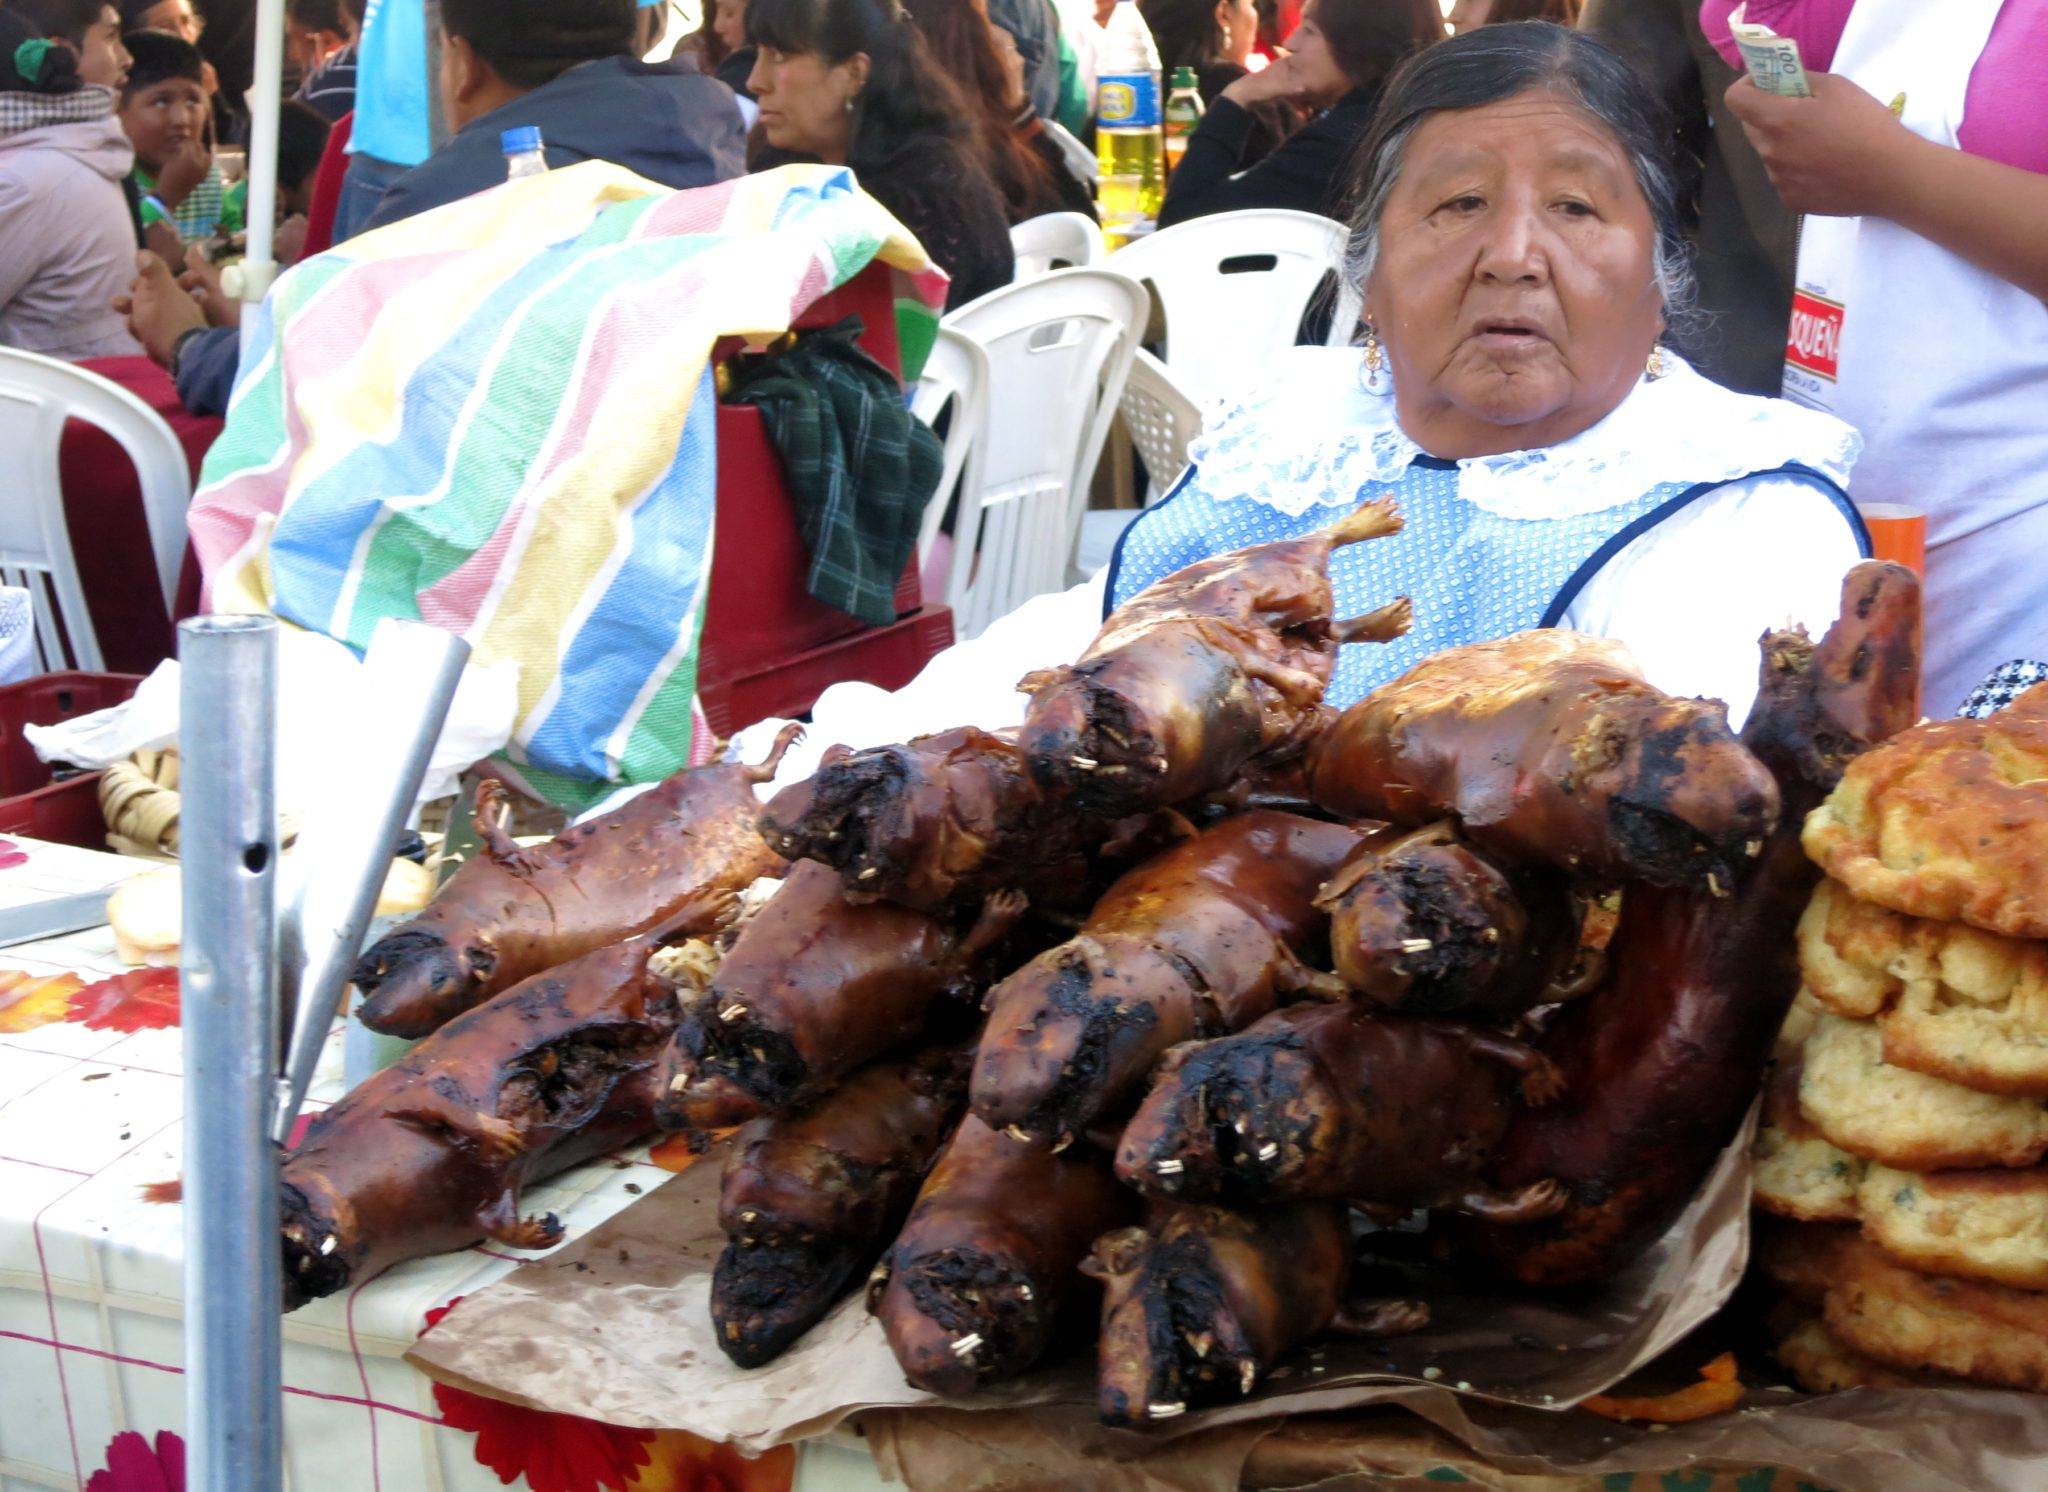 Guinea pig is a popular delicacy in Perú. 